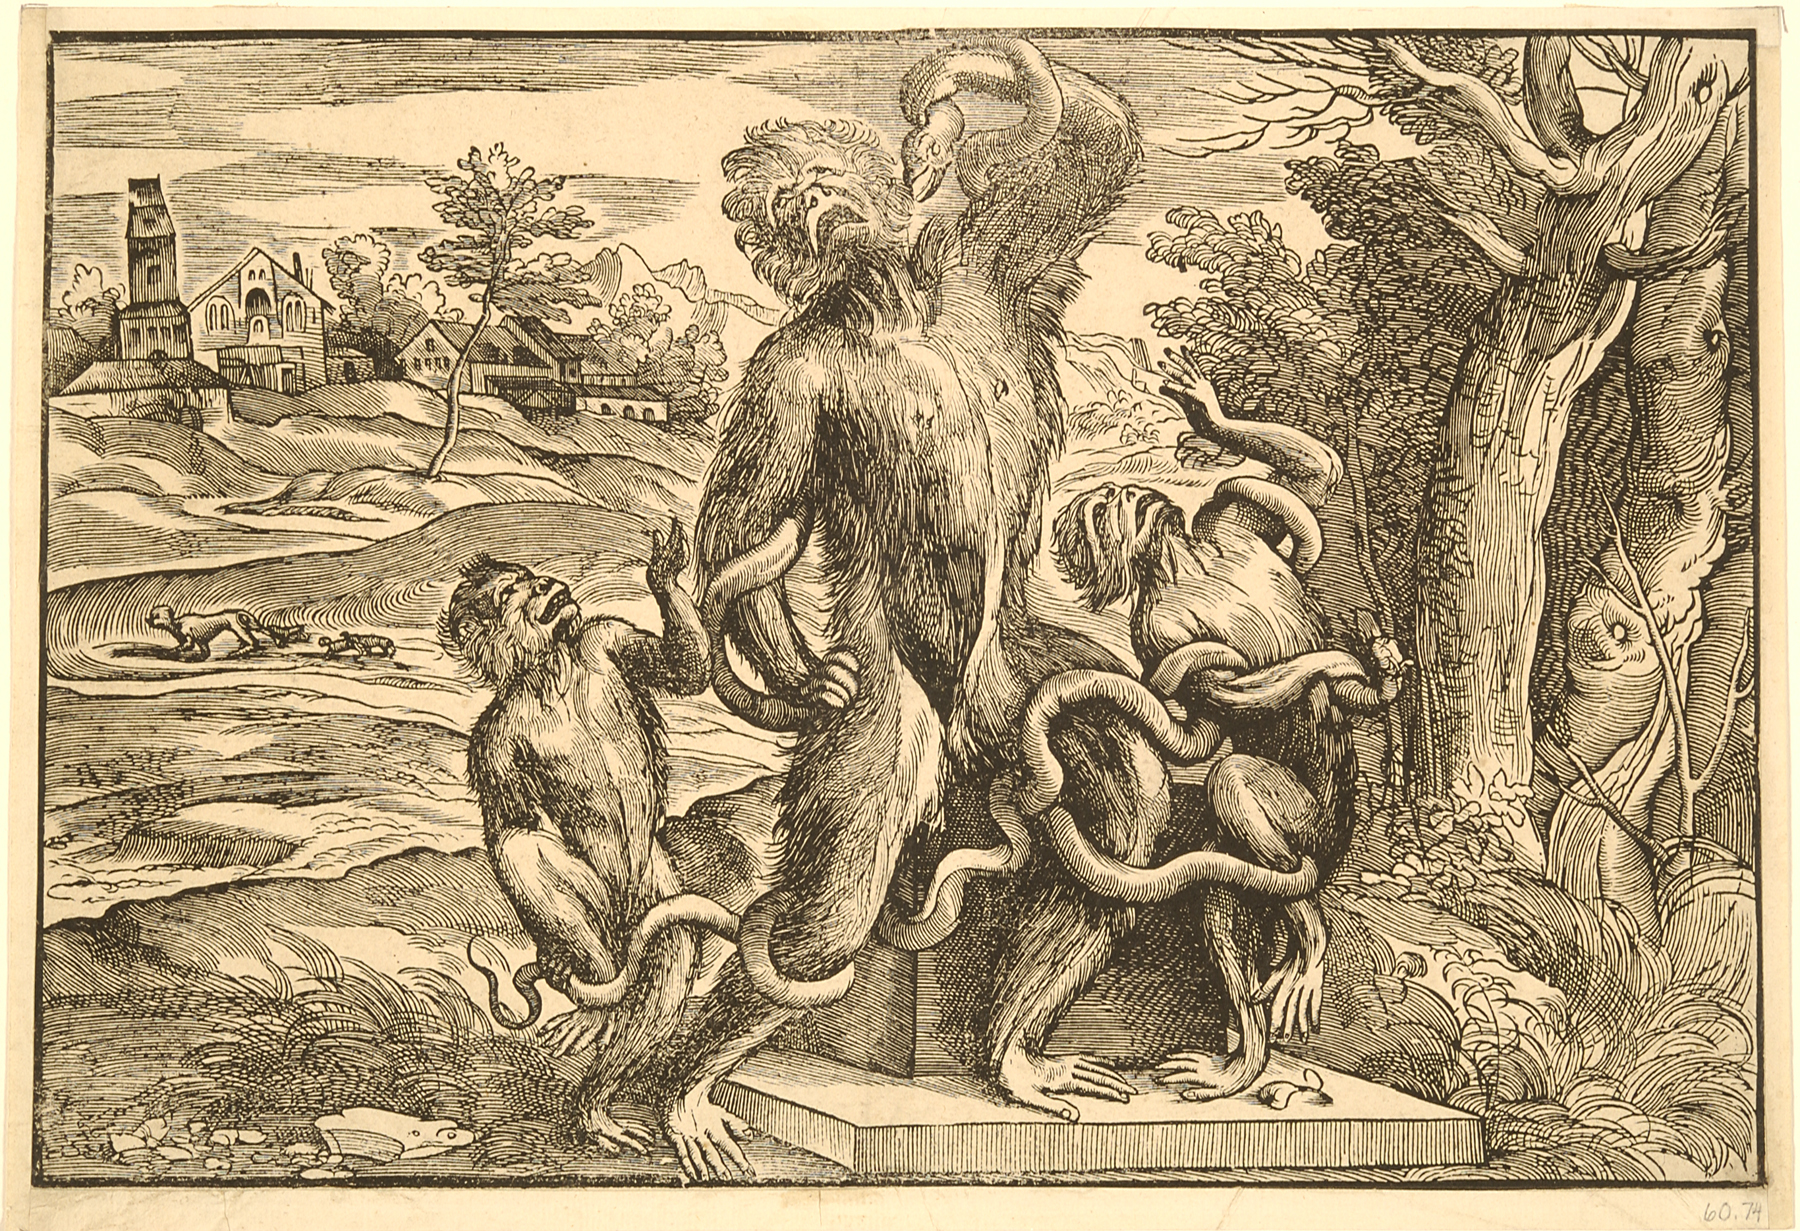 Caricature of the Laocoön represented as a Monkey in a Landscape